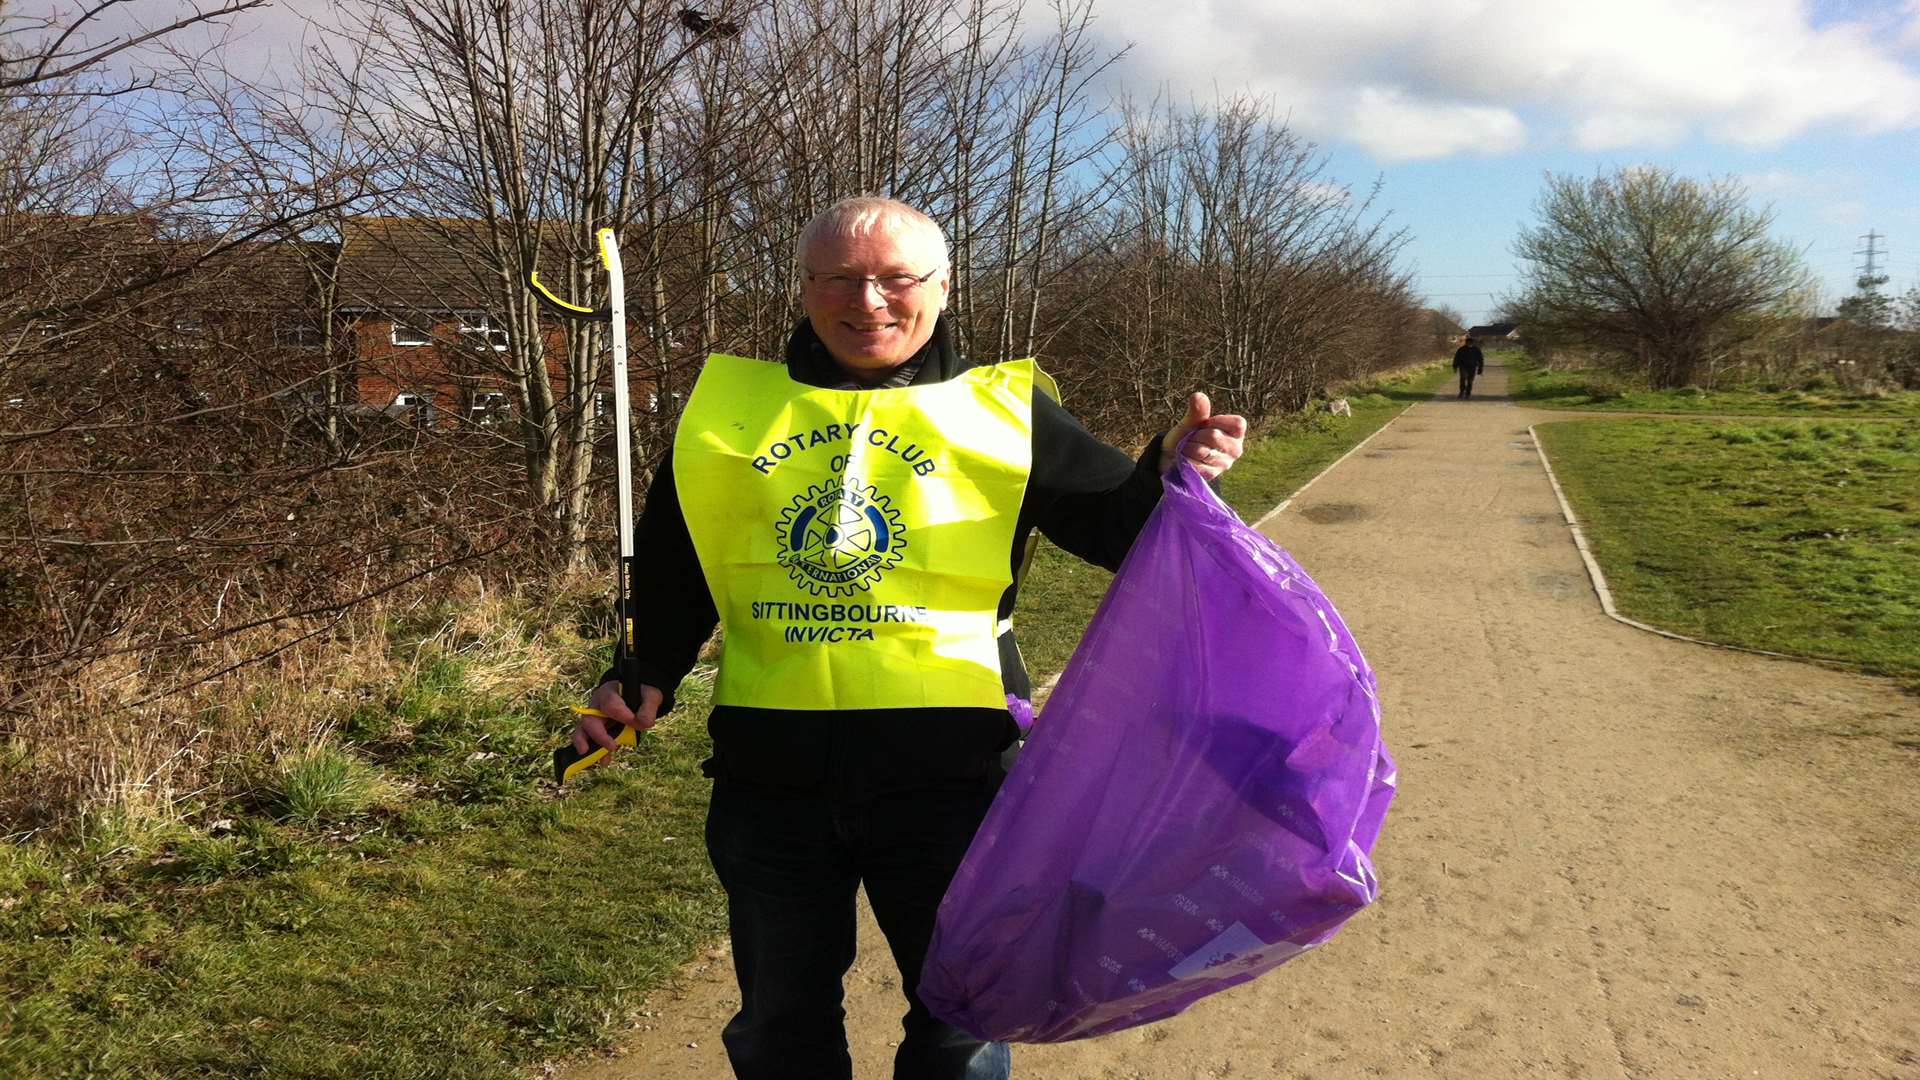 Richard Joy cleaning for the Queen in Milton Creek Country Park, Sittingbourne